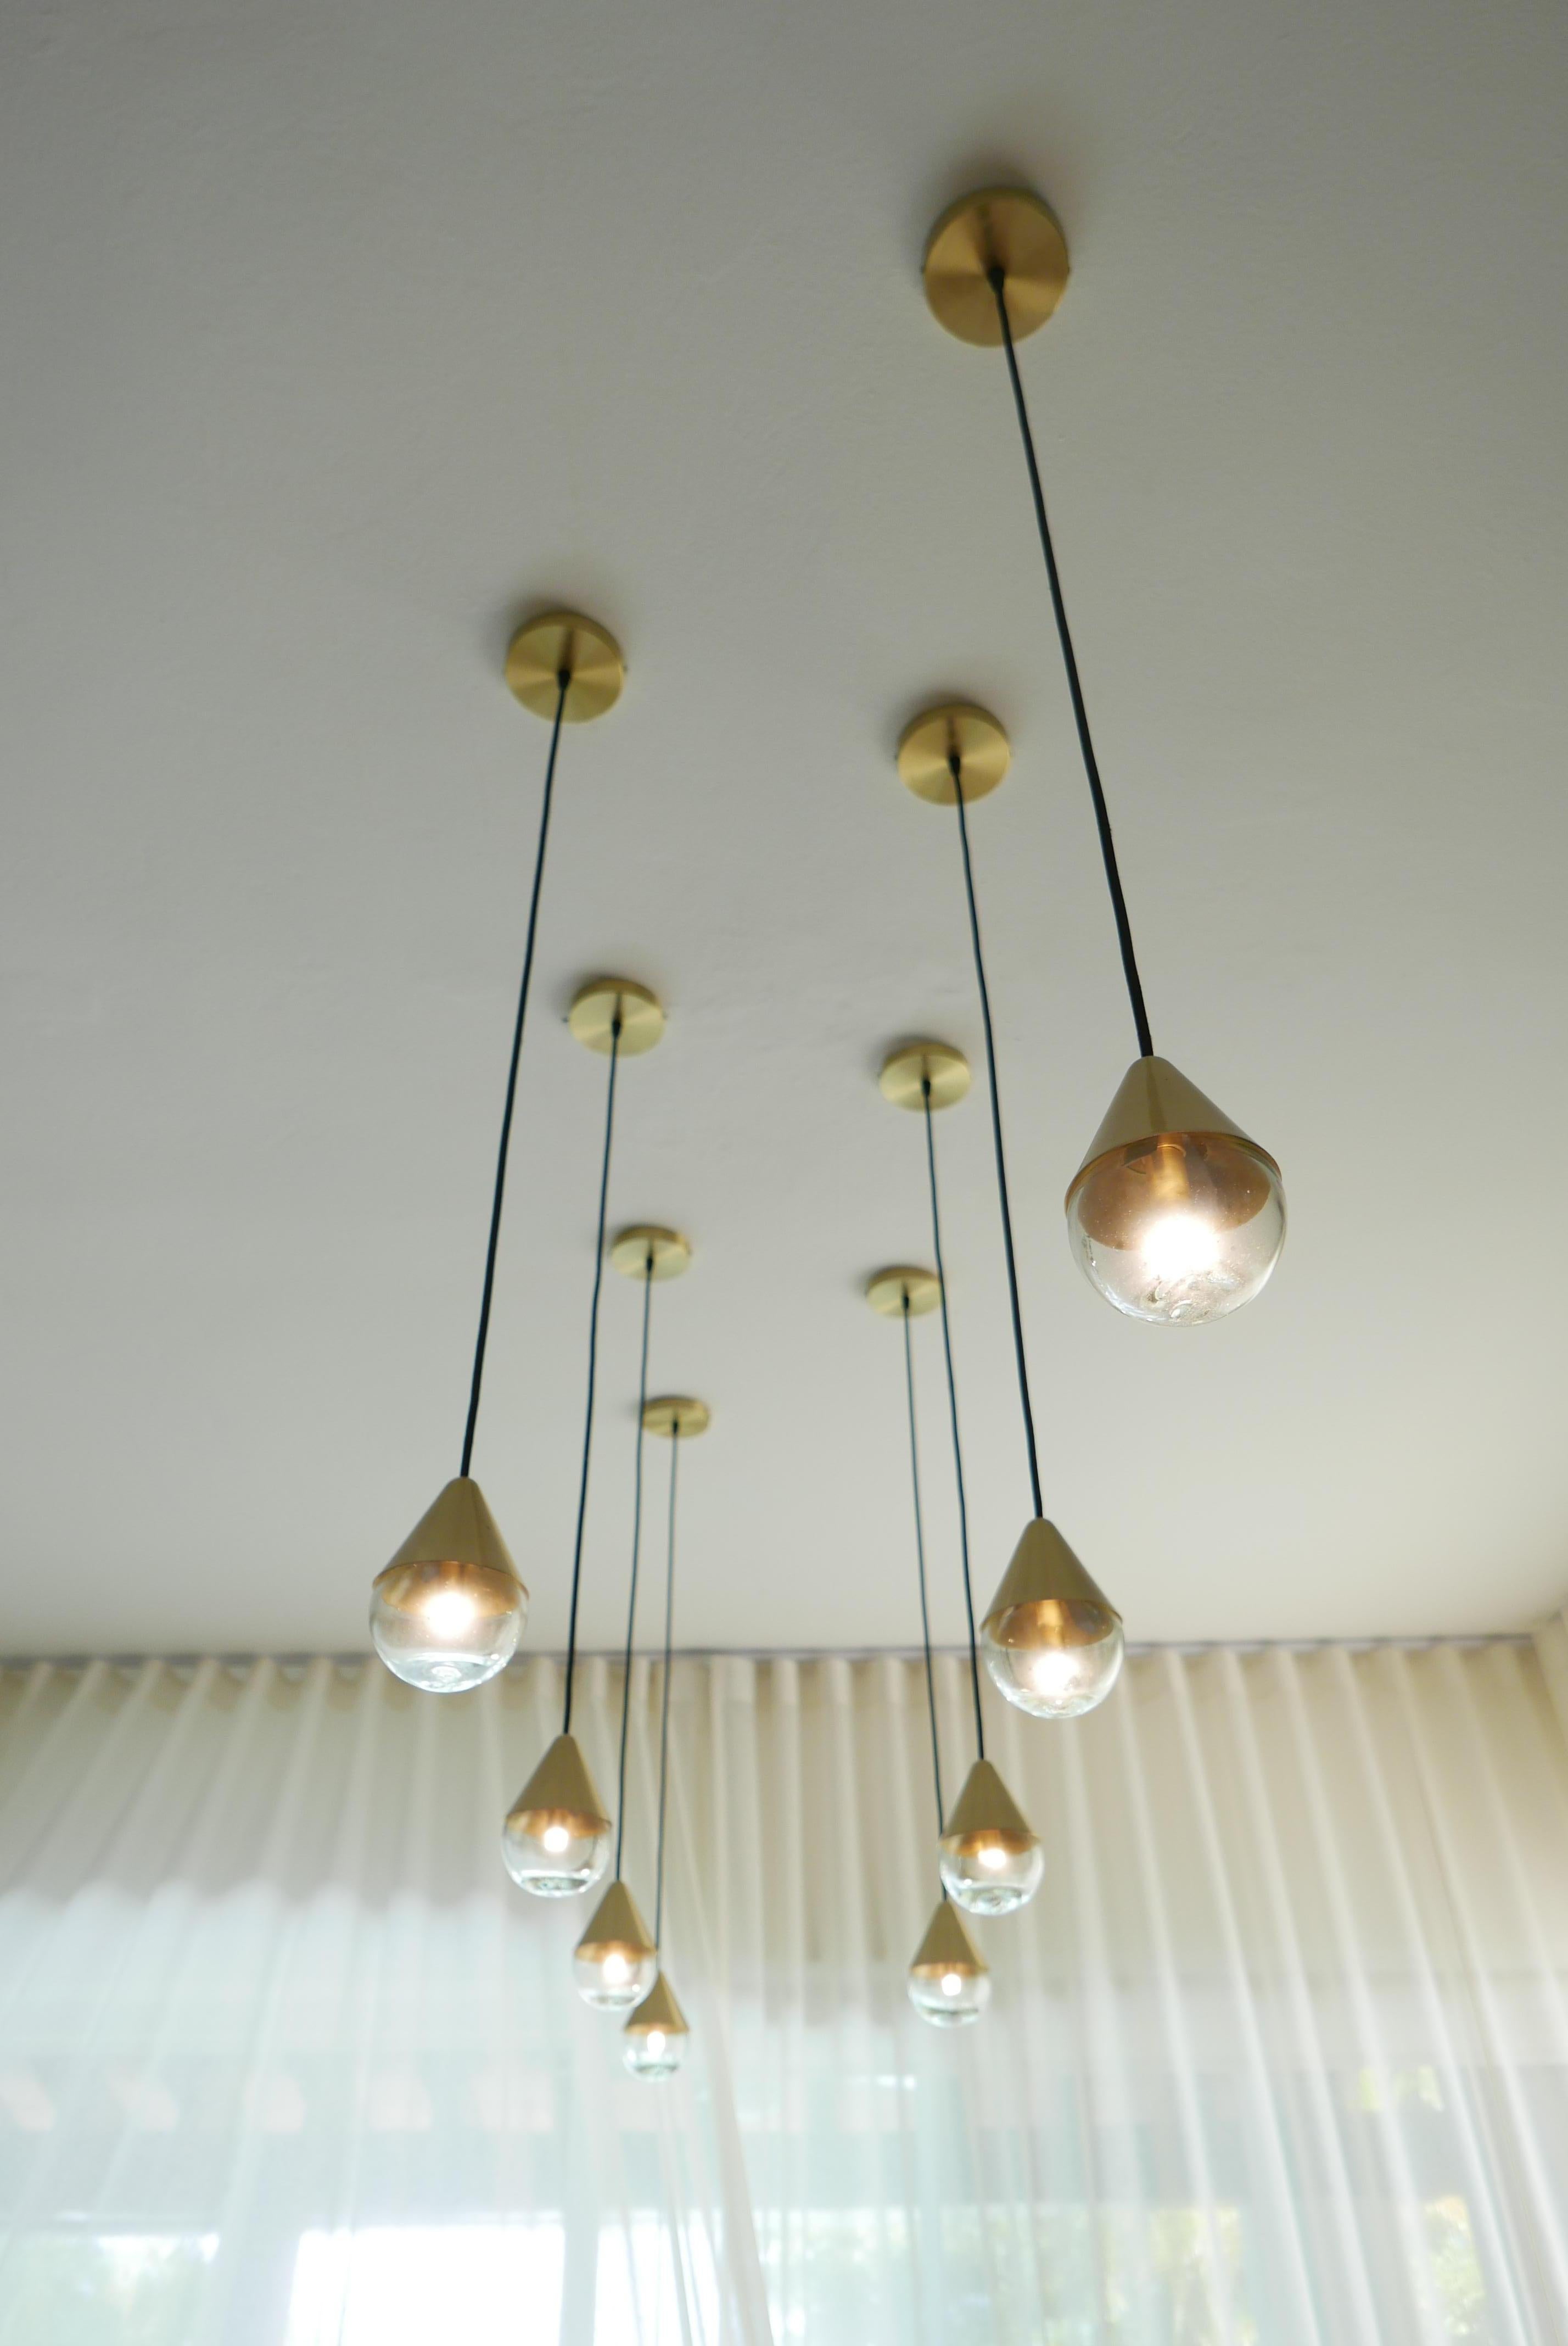 Blownglass and Brass Pendant Lamp for Chandelier or Individual Use In New Condition For Sale In Zapopan, Jalisco. CP